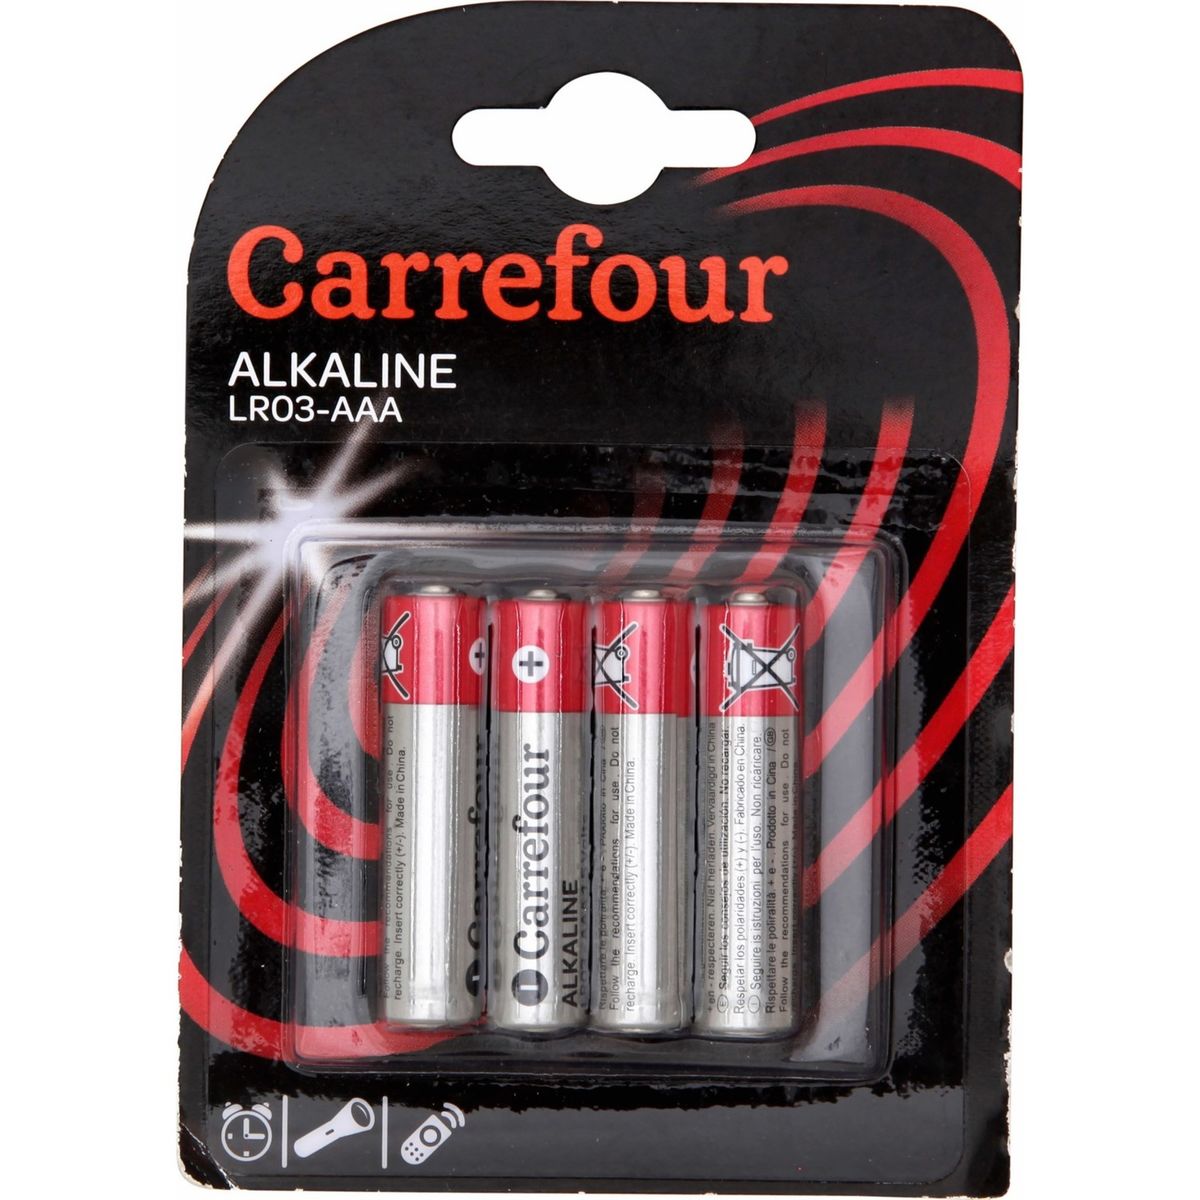 Carrefour 4 Piles Alcalines LR03-AAA